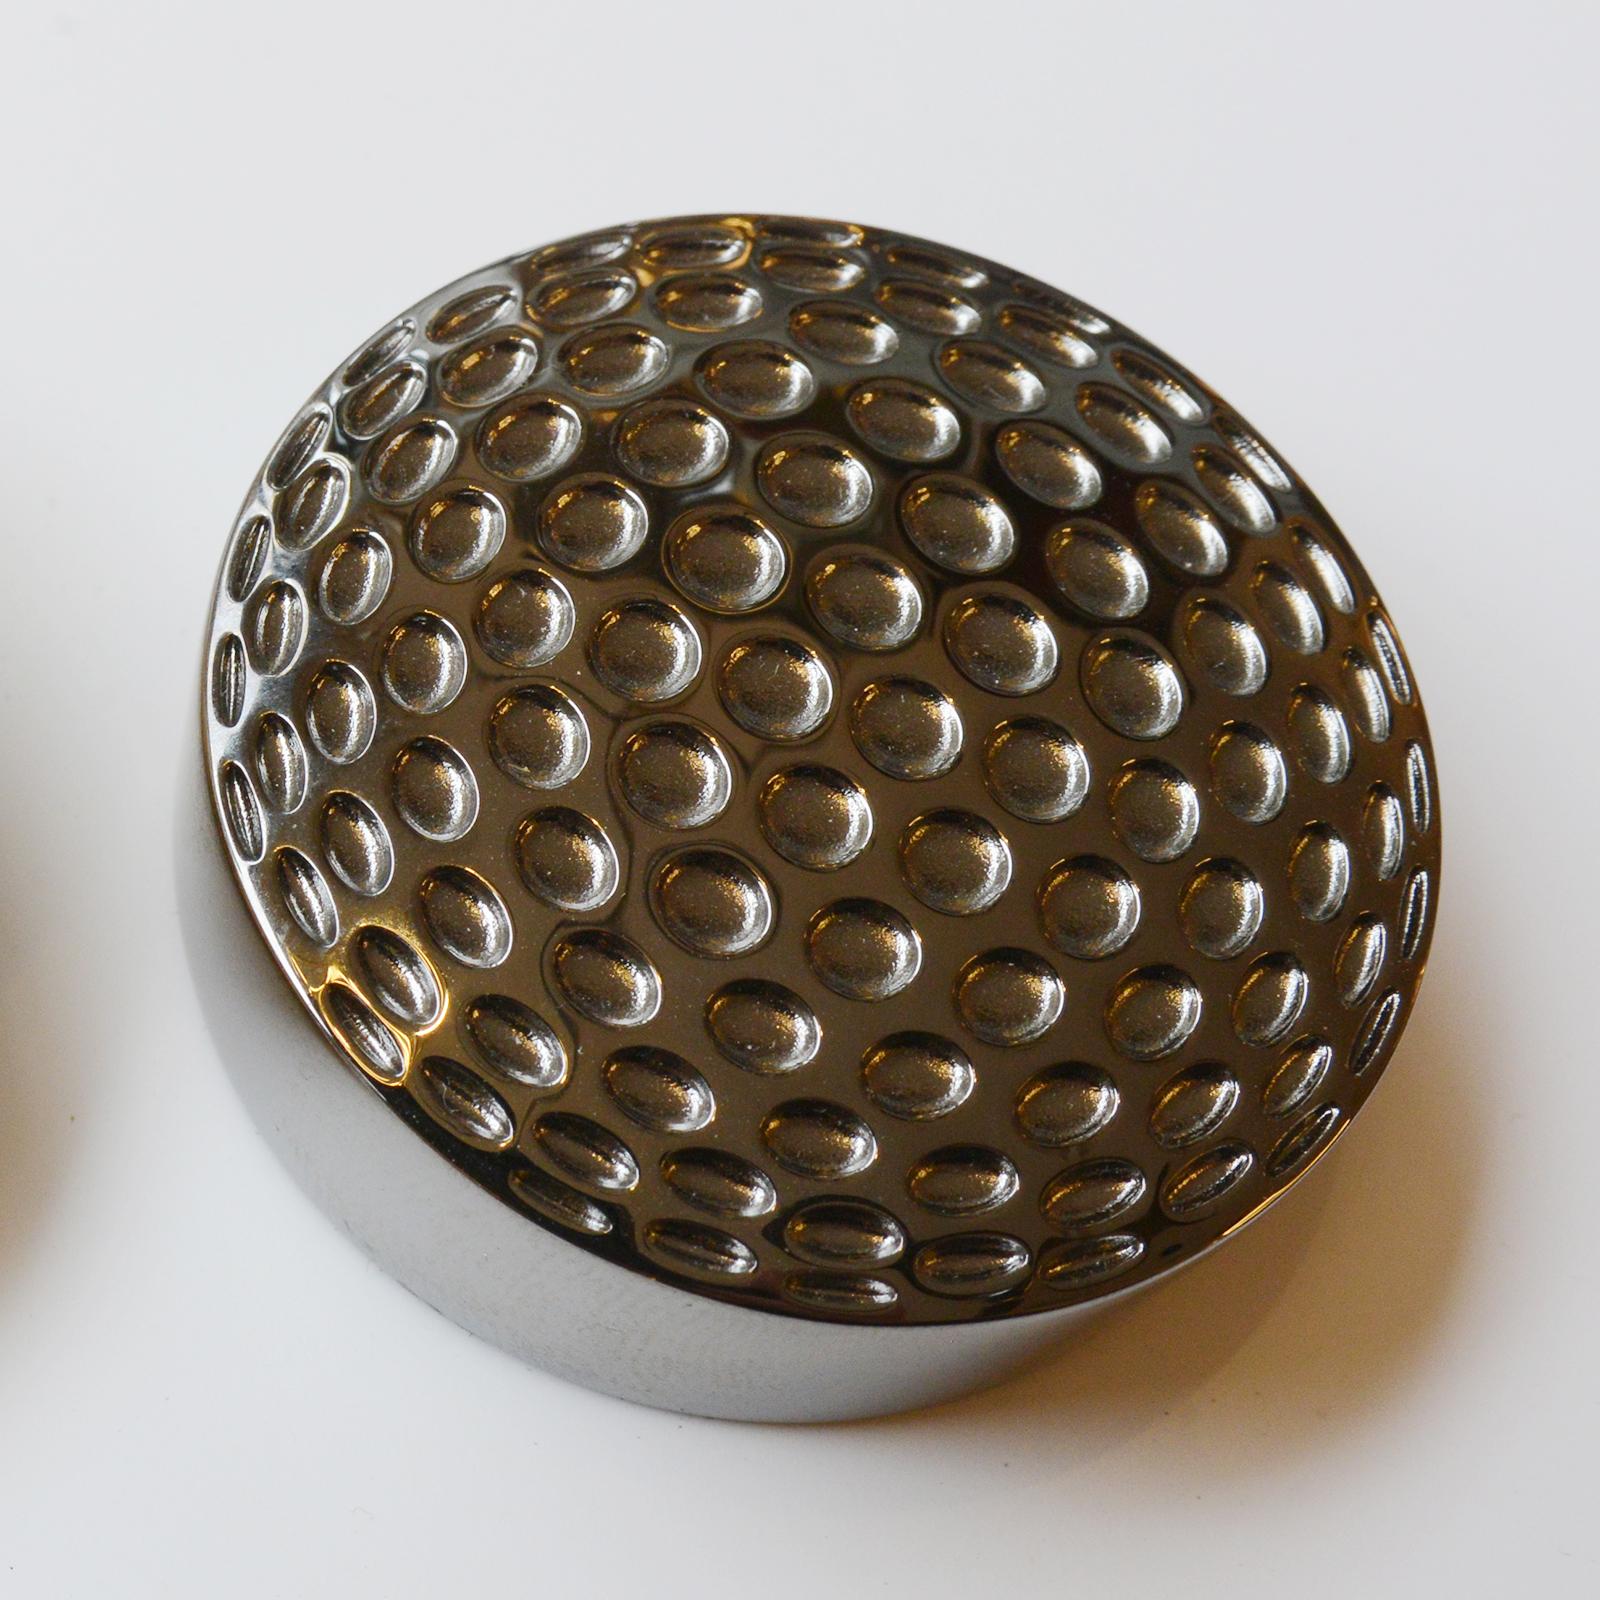 Paperweight golf ruthenium made
entirely in solid brass in ruthenium
finish with golf ball pattern.
Also available in gold or palladium.